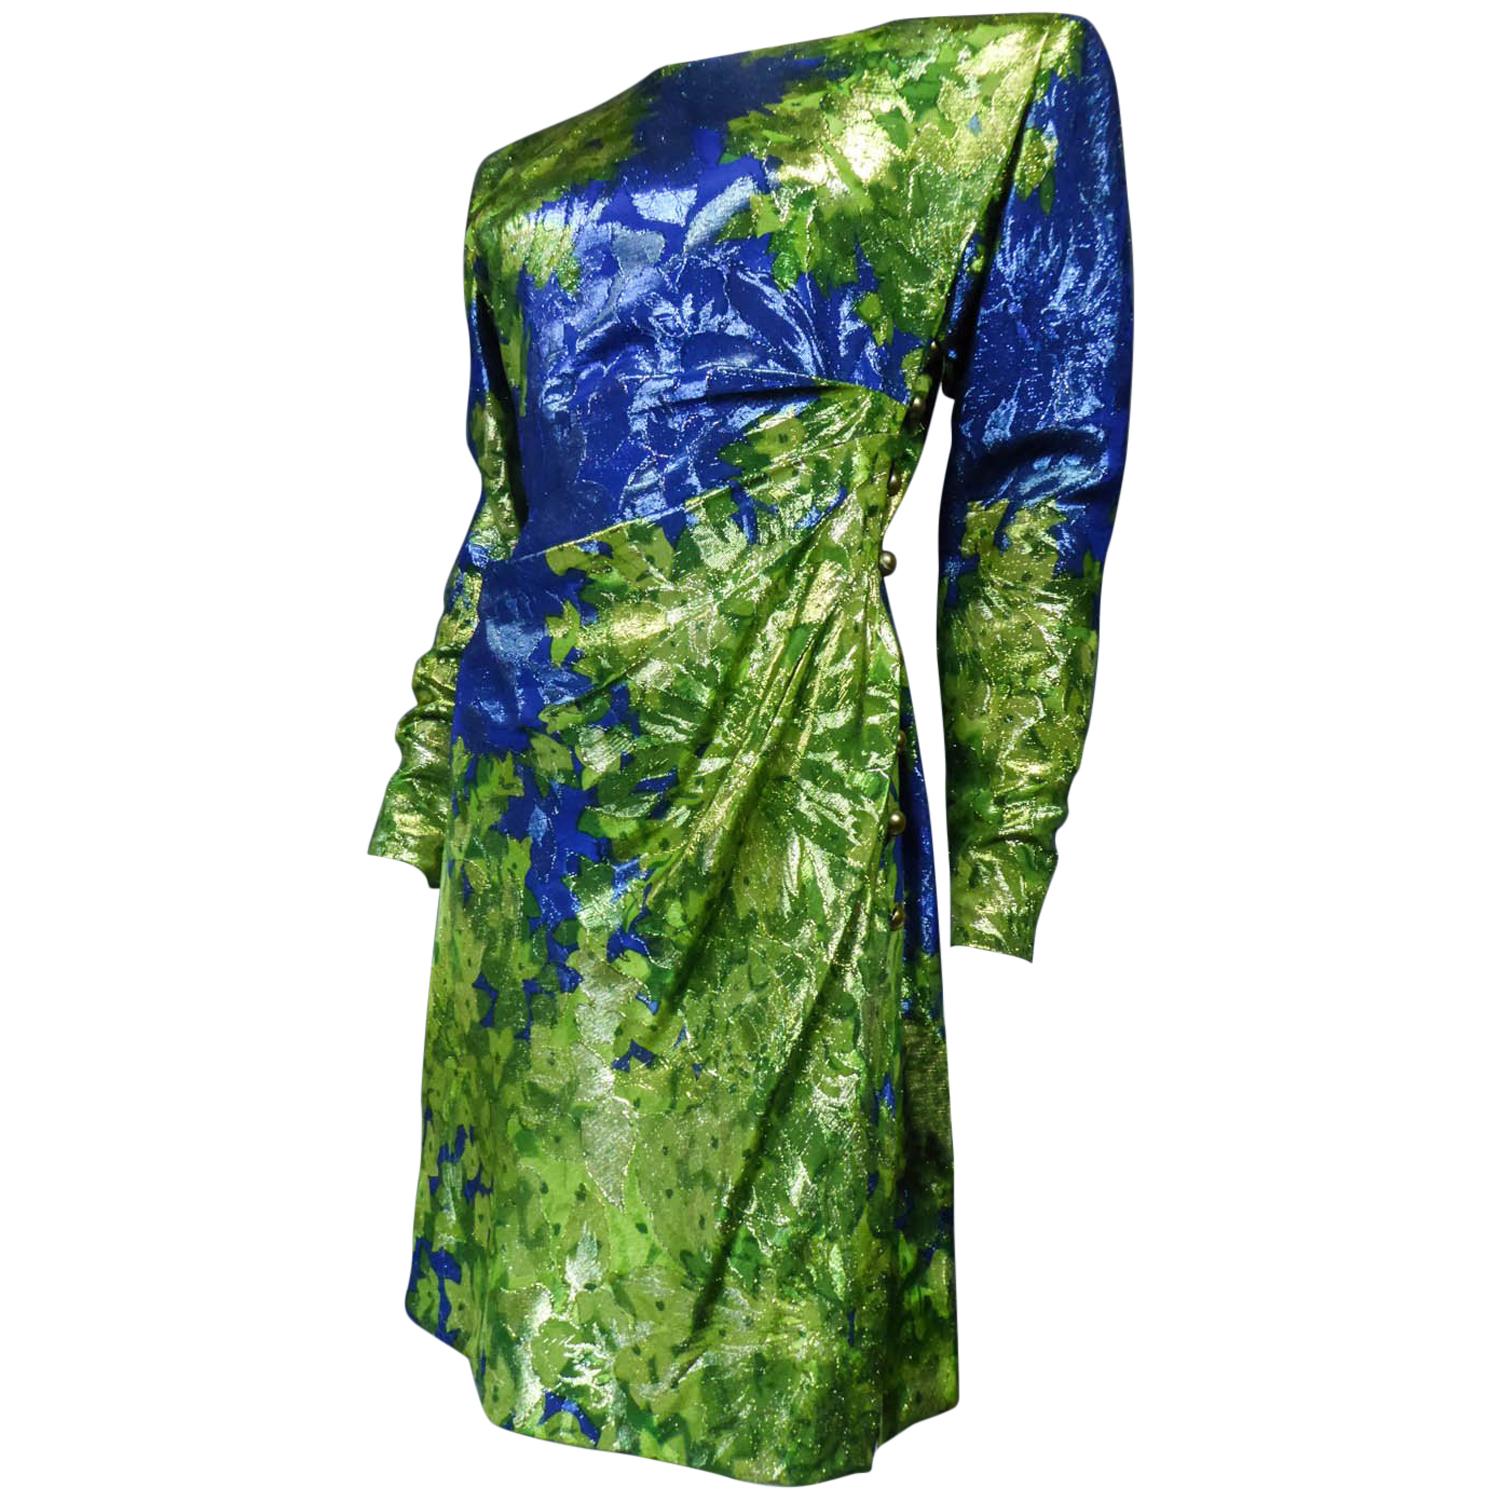 Circa 1989
France

Cocktail dress in green and blue lamé printed with floral impressionist inspired patterns from the Van Gogh Collection by the famous couturier. Delicate graphical overlay from yellow, gold to soft green and electric blue inspired